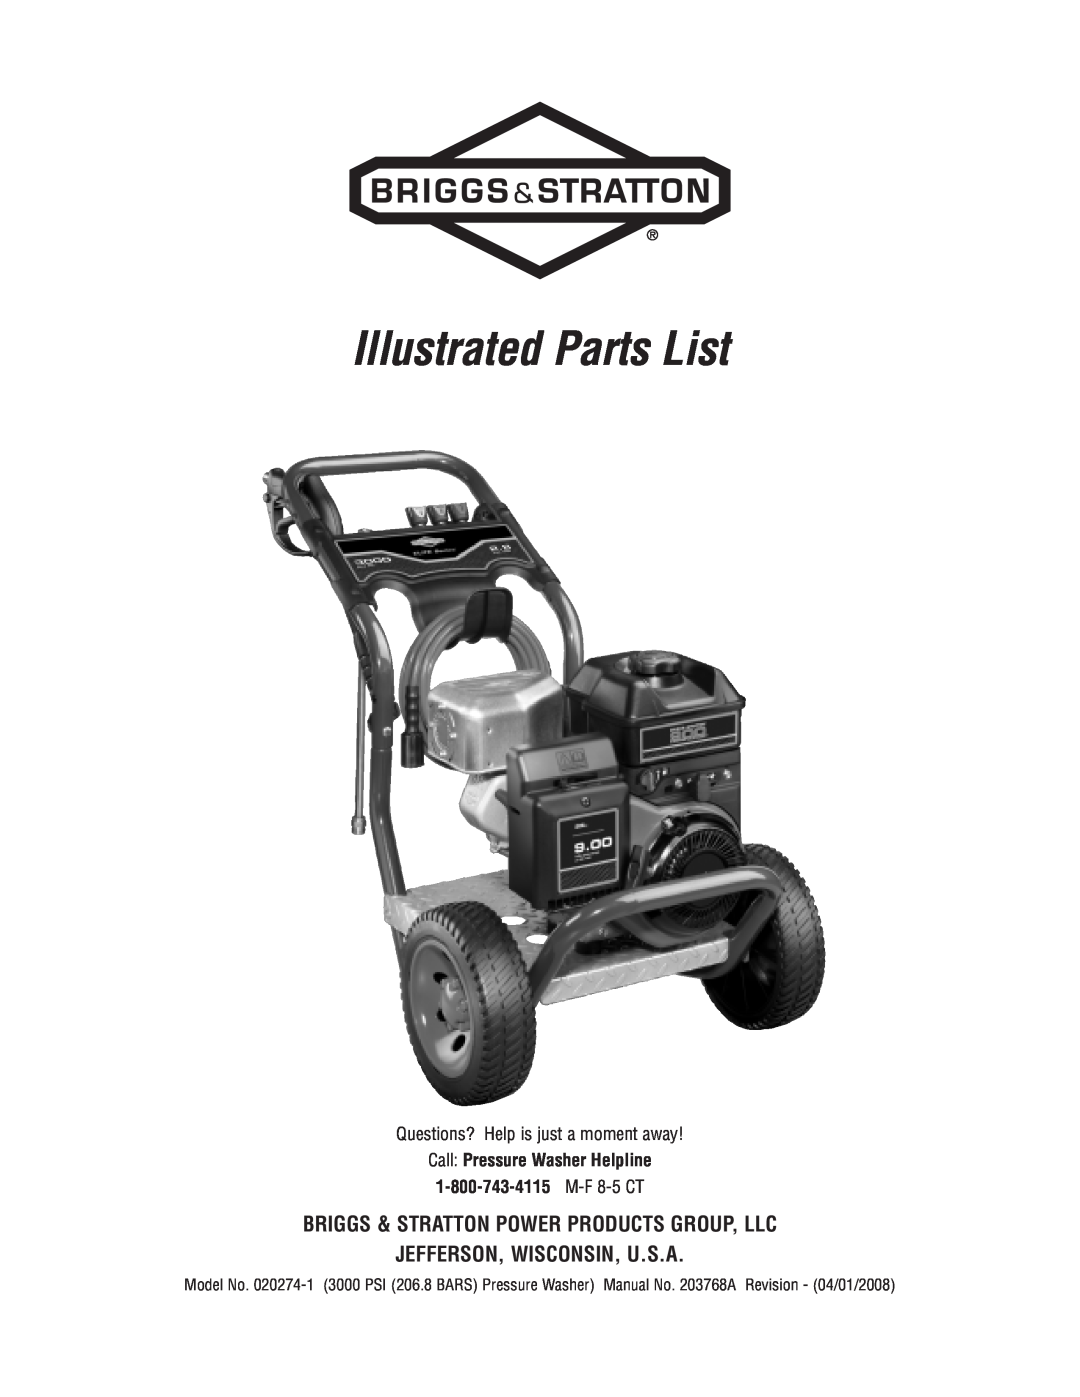 Briggs & Stratton 020274-1 manual Illustrated Parts List, Briggs & Stratton Power Products Group, Llc 